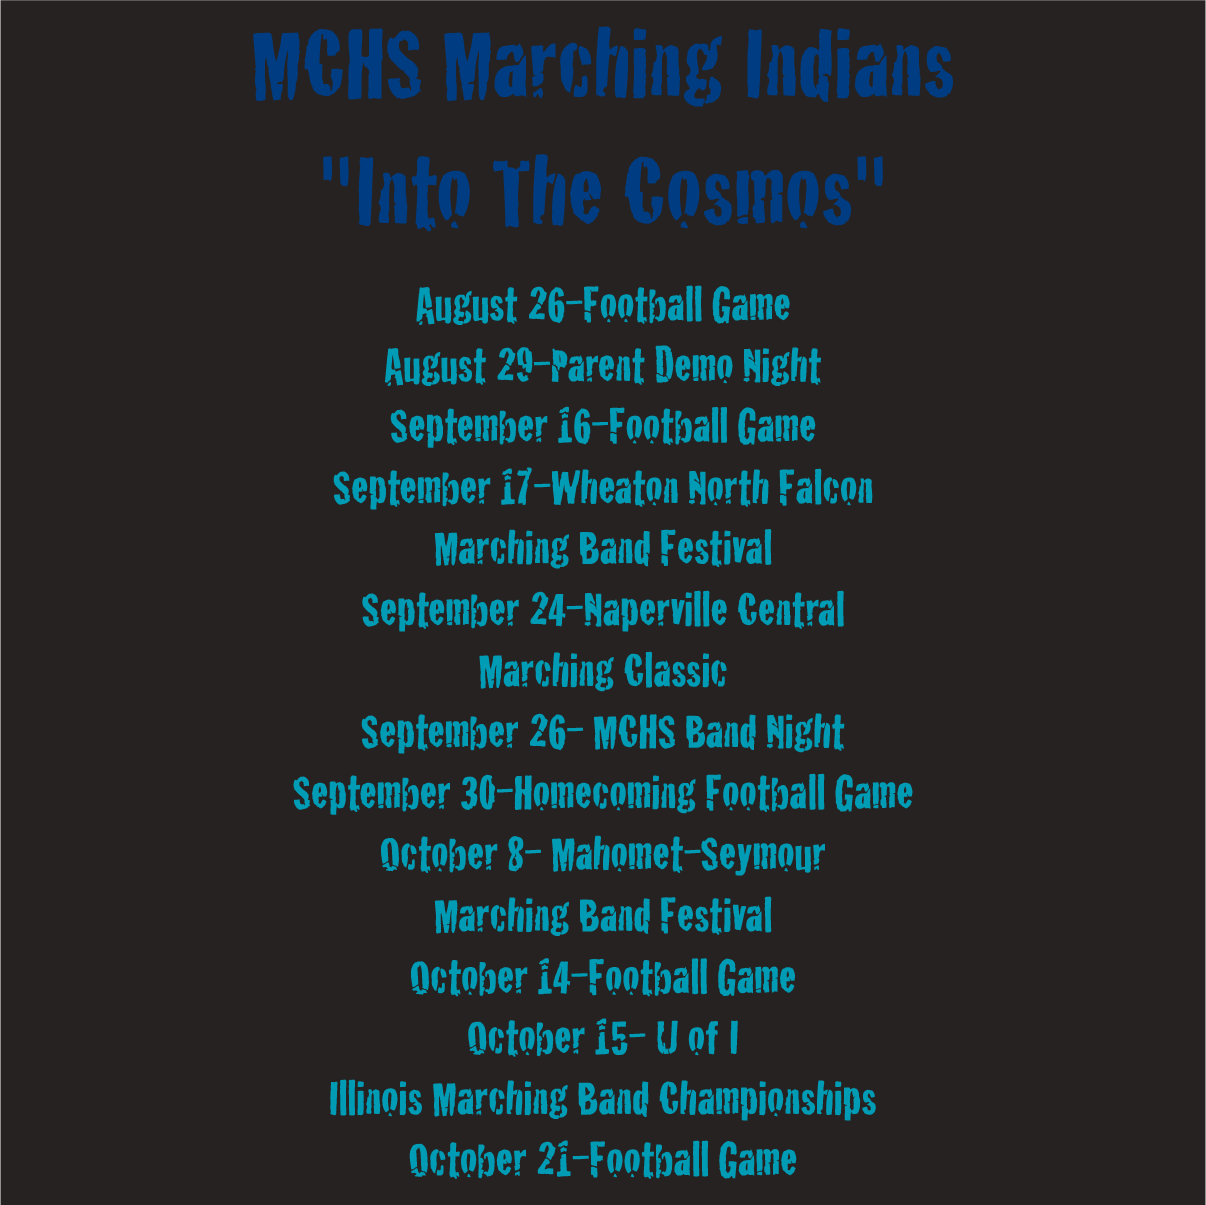 MCHS Marching Indians 2016 Into the Cosmos Show Shirt shirt design - zoomed